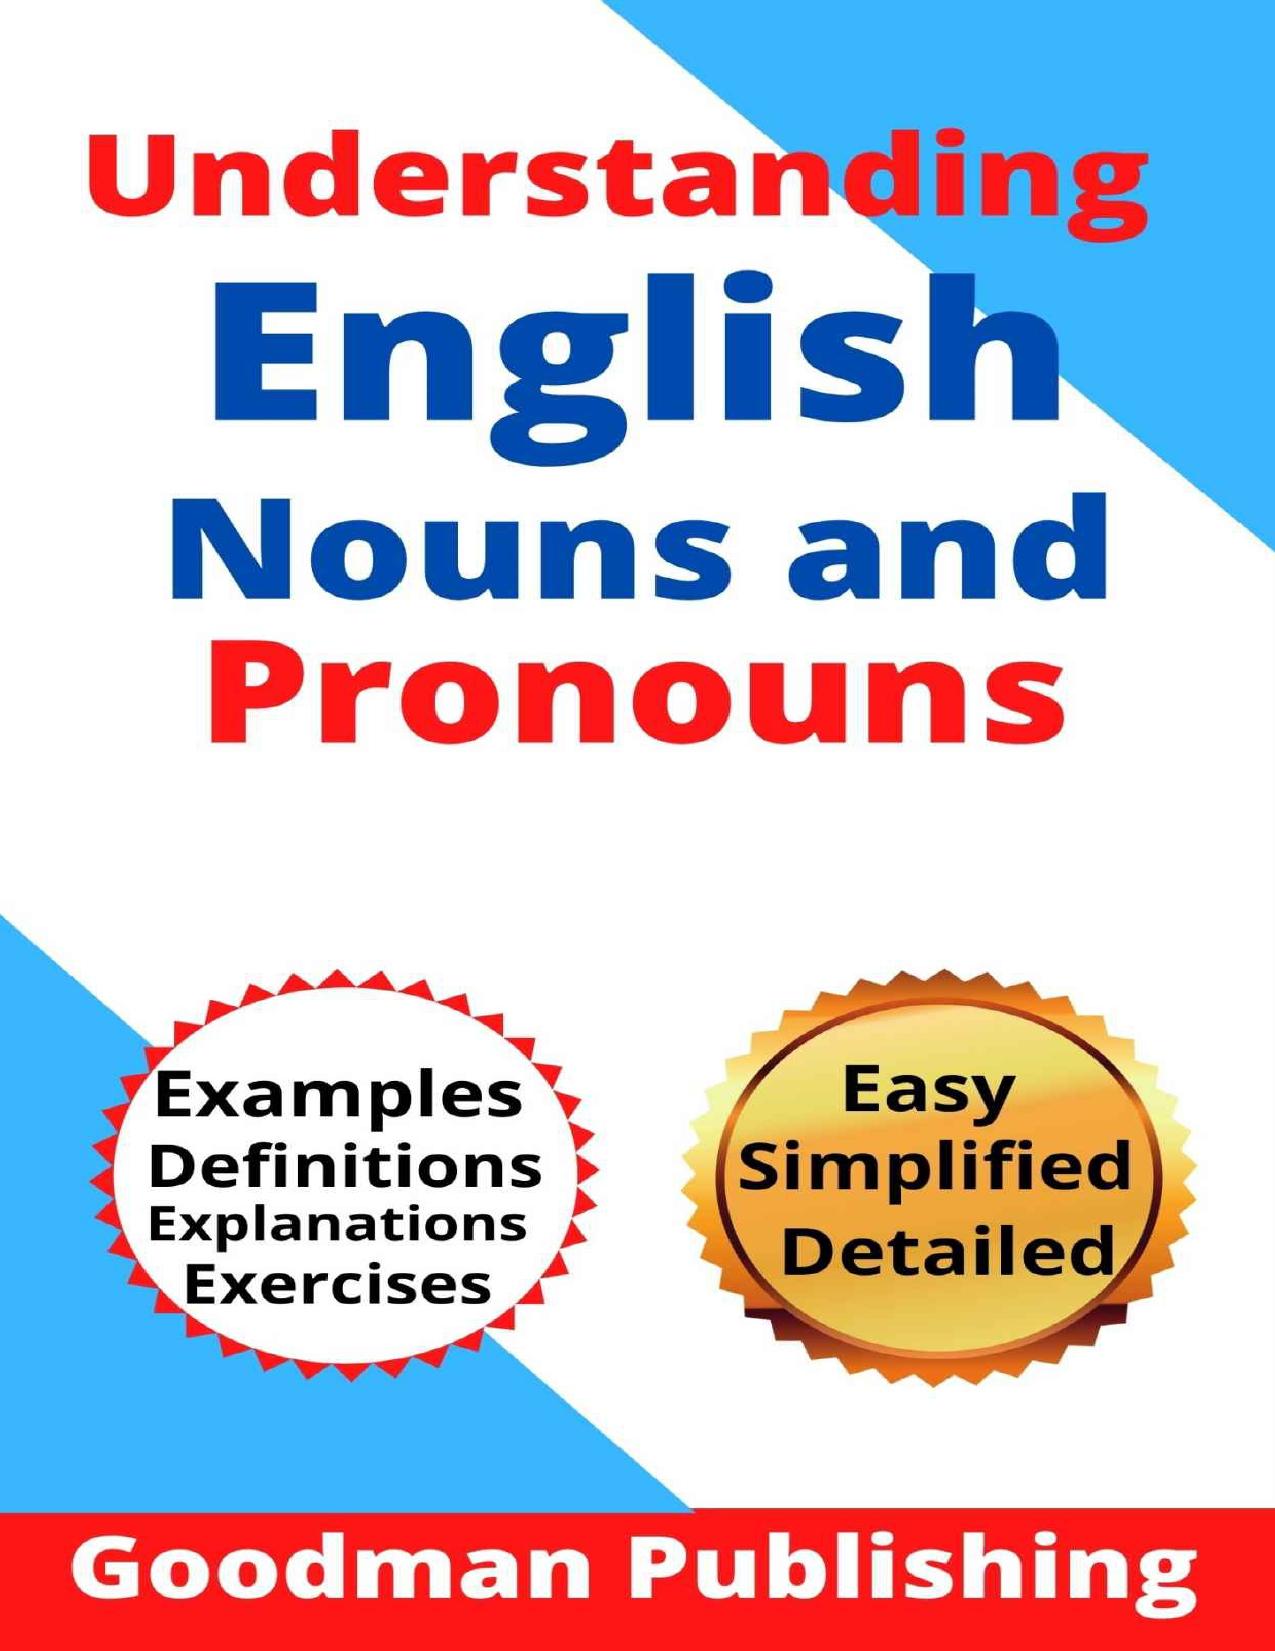 Understanding English Nouns and Pronouns: A Step-By-Step Guide to English as a Second Language for Teachers, Parents, Foreigners, and ESL Learners to Speak and Write Like a Pro